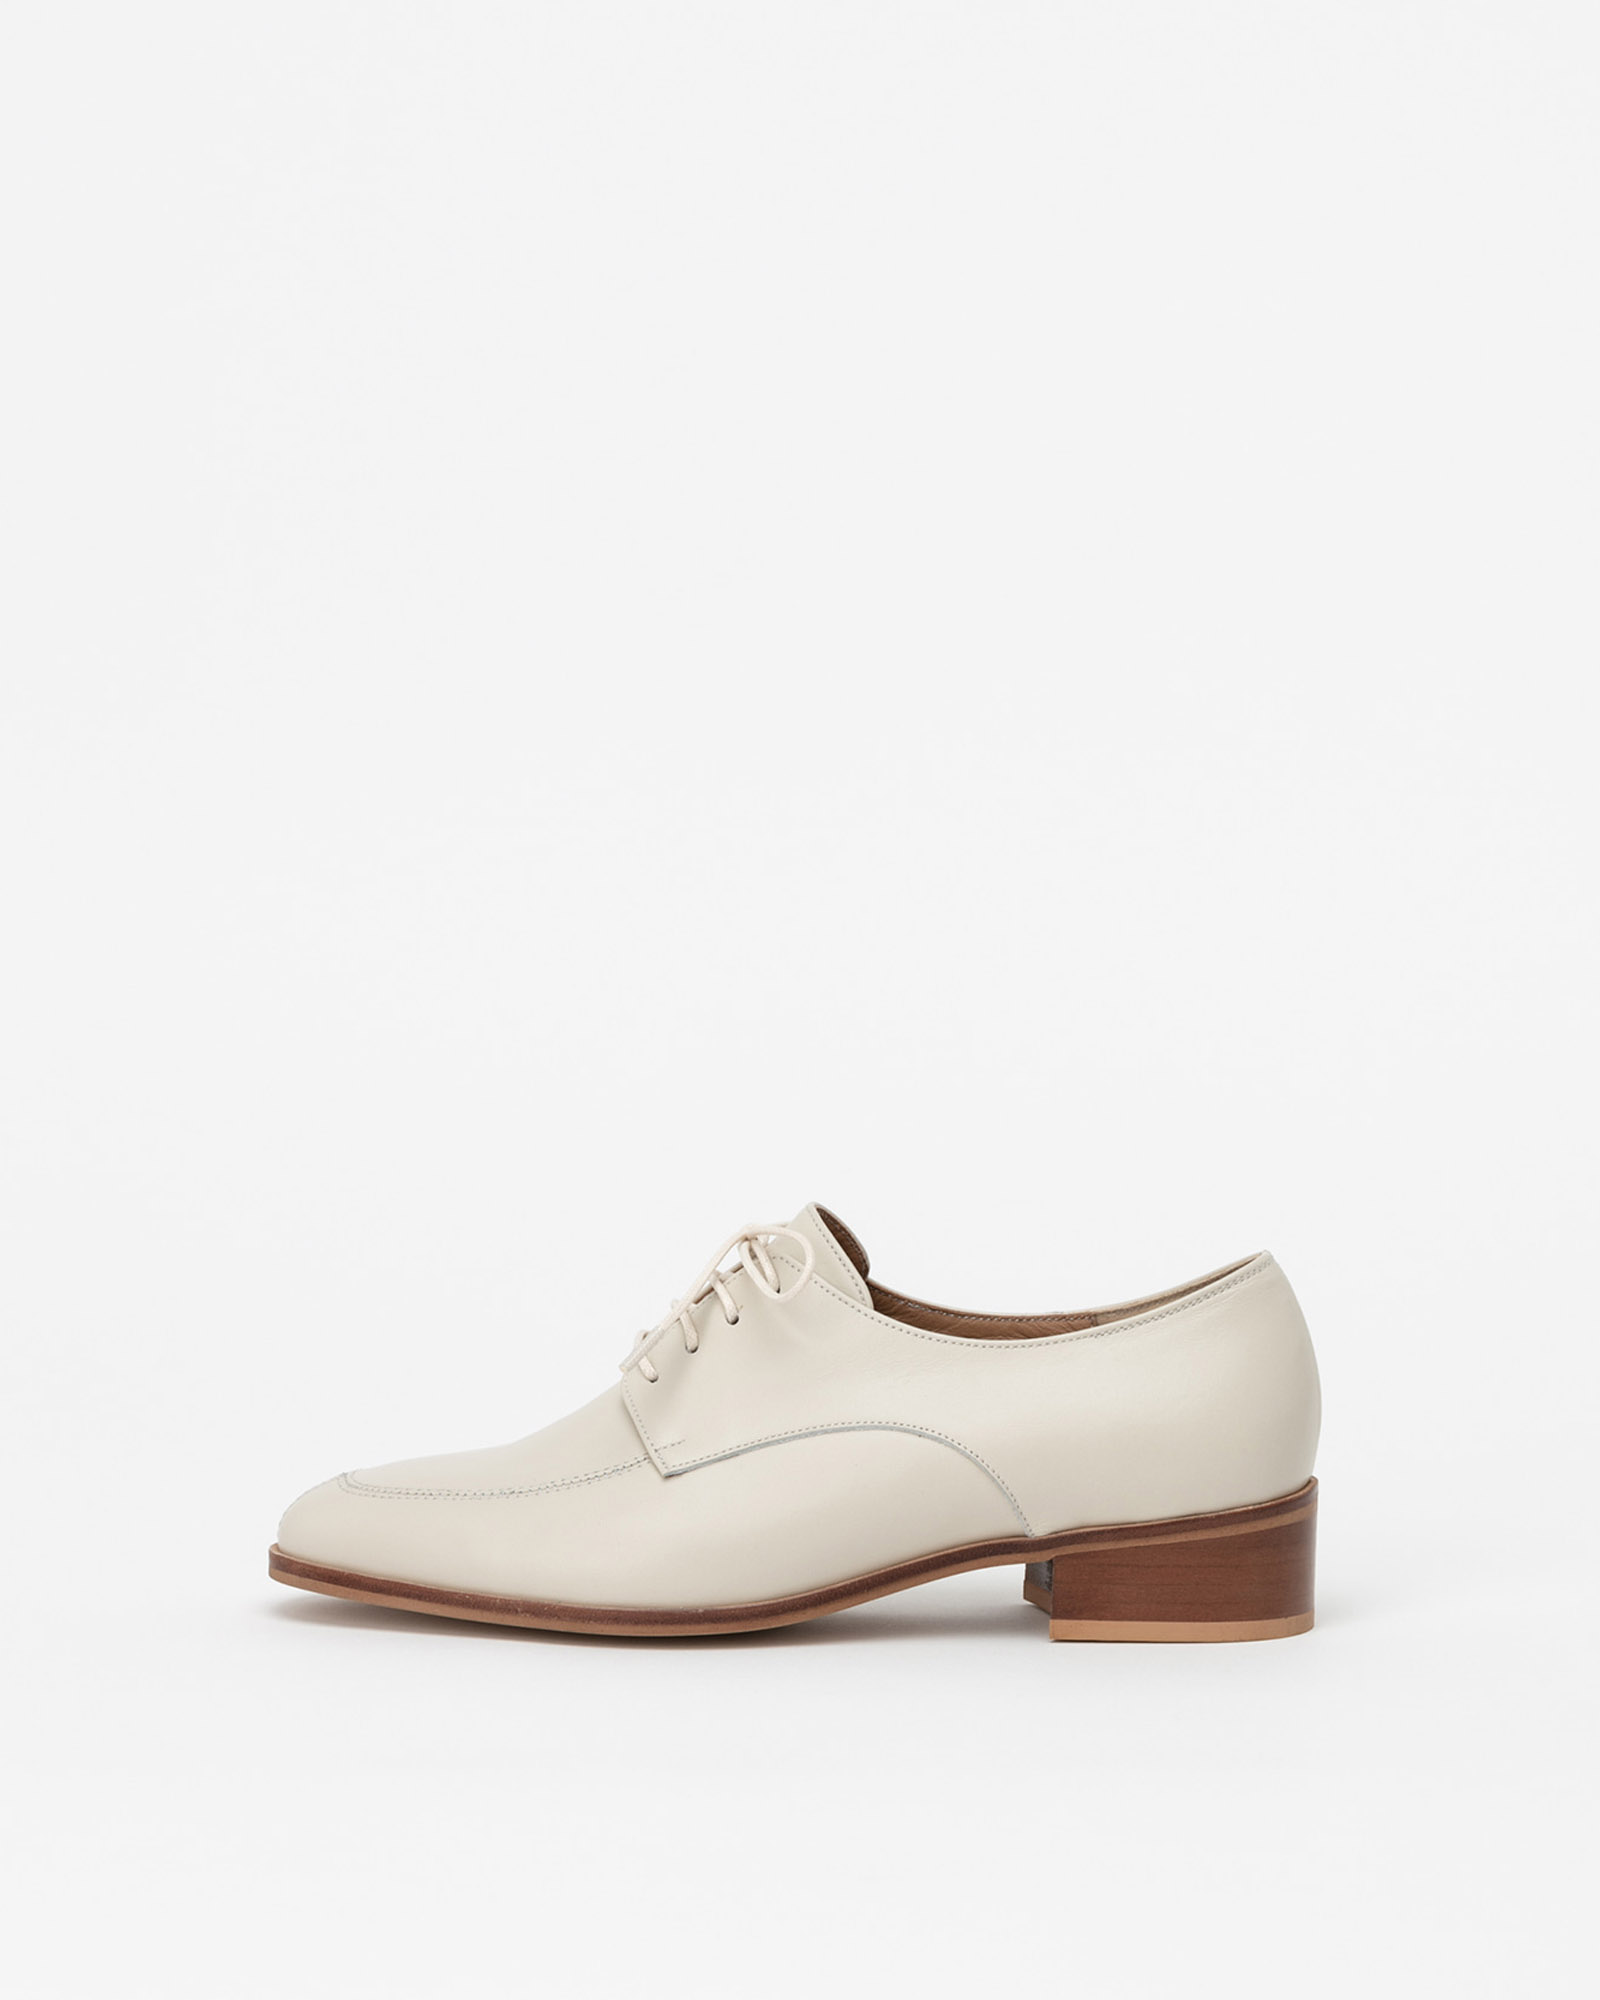 Duna Lace-up Loafers in Ivory